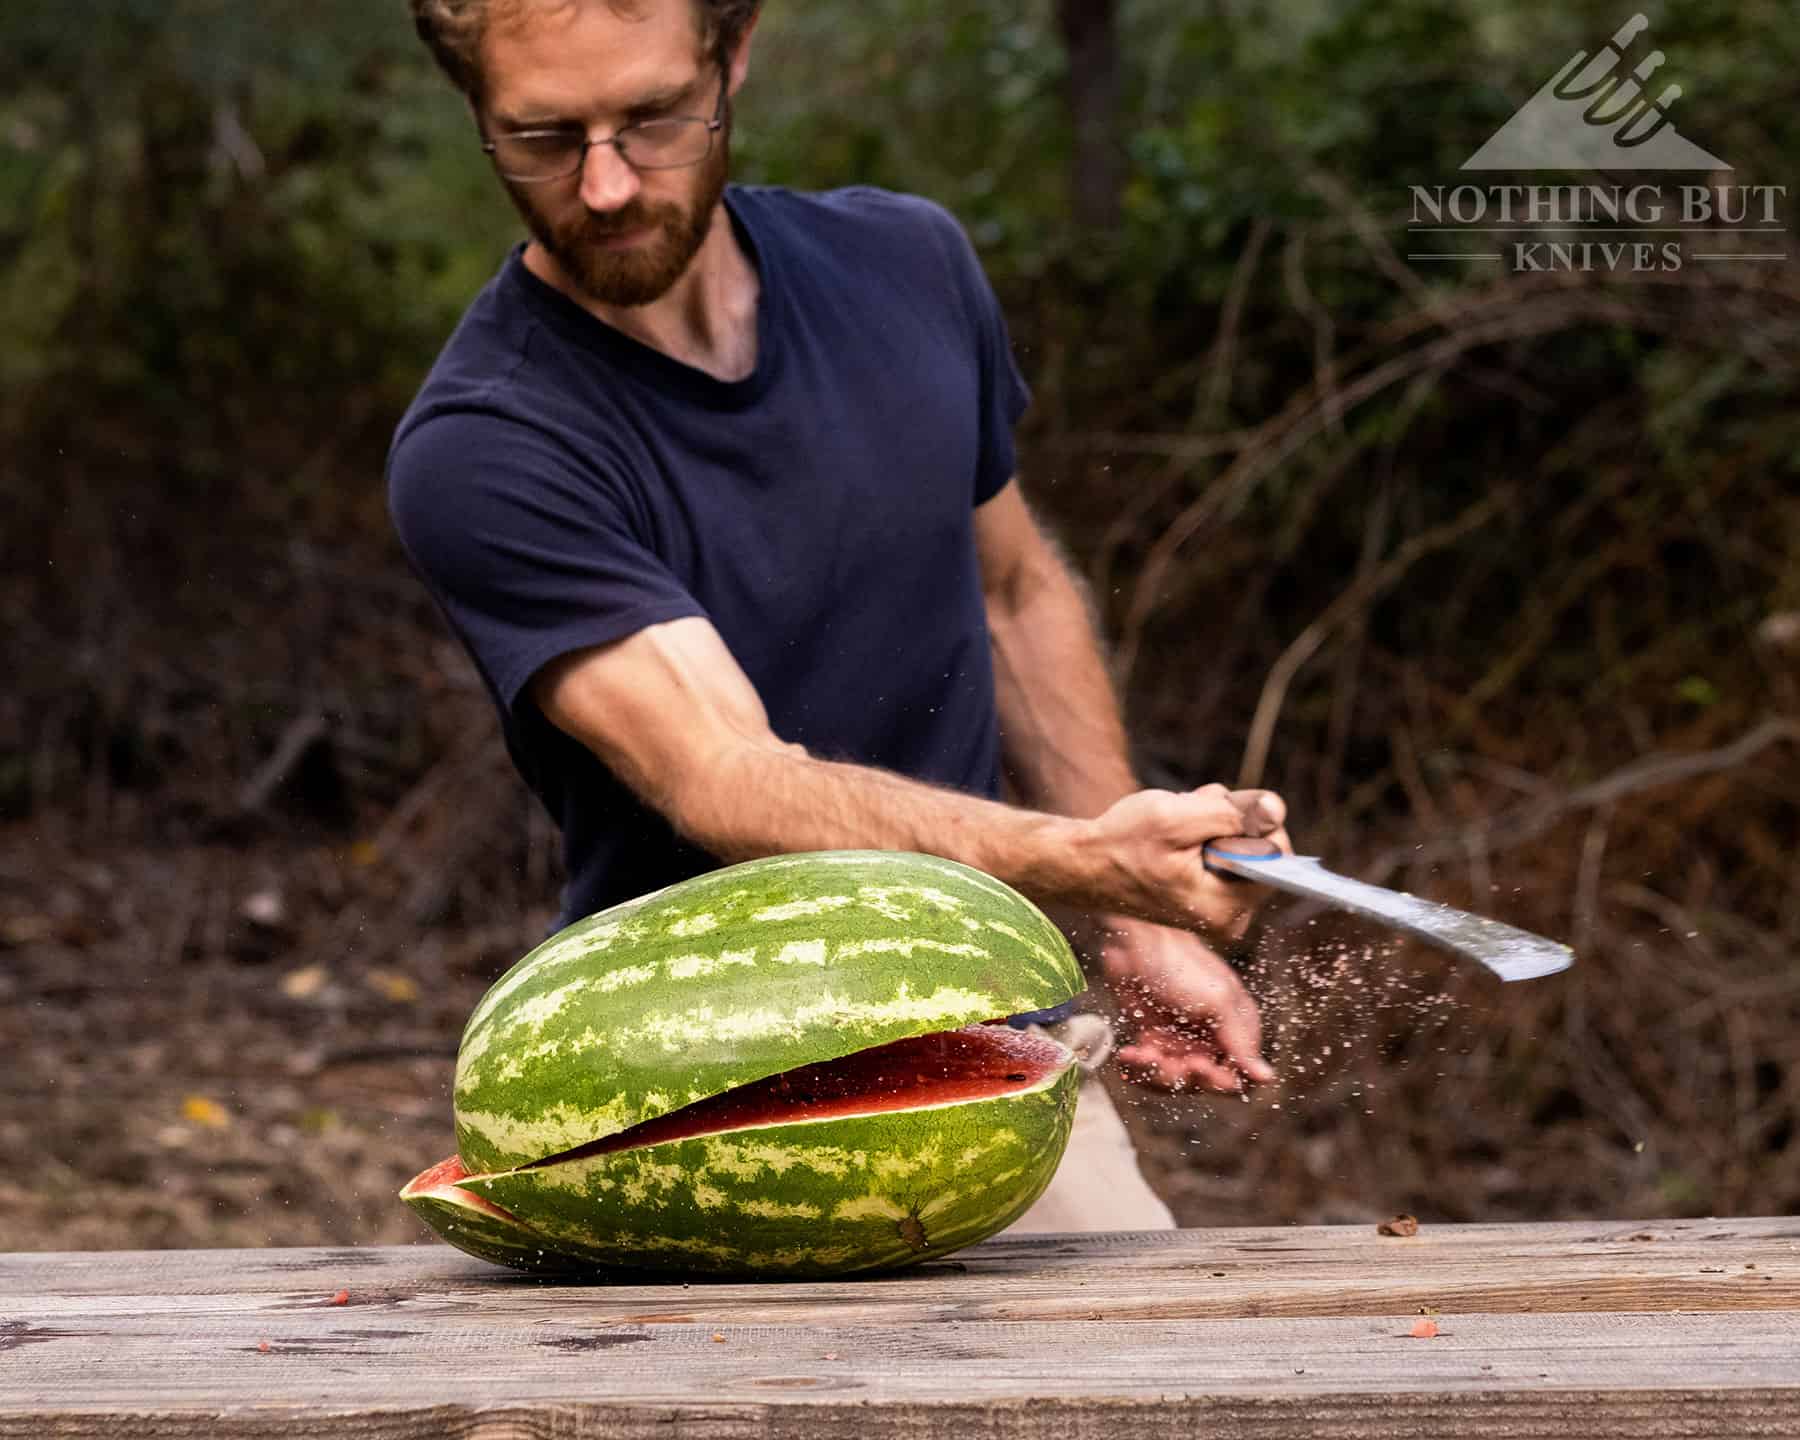 The Apex is surprising good at slicing as this photo of a person slicing through a watermelon shows.